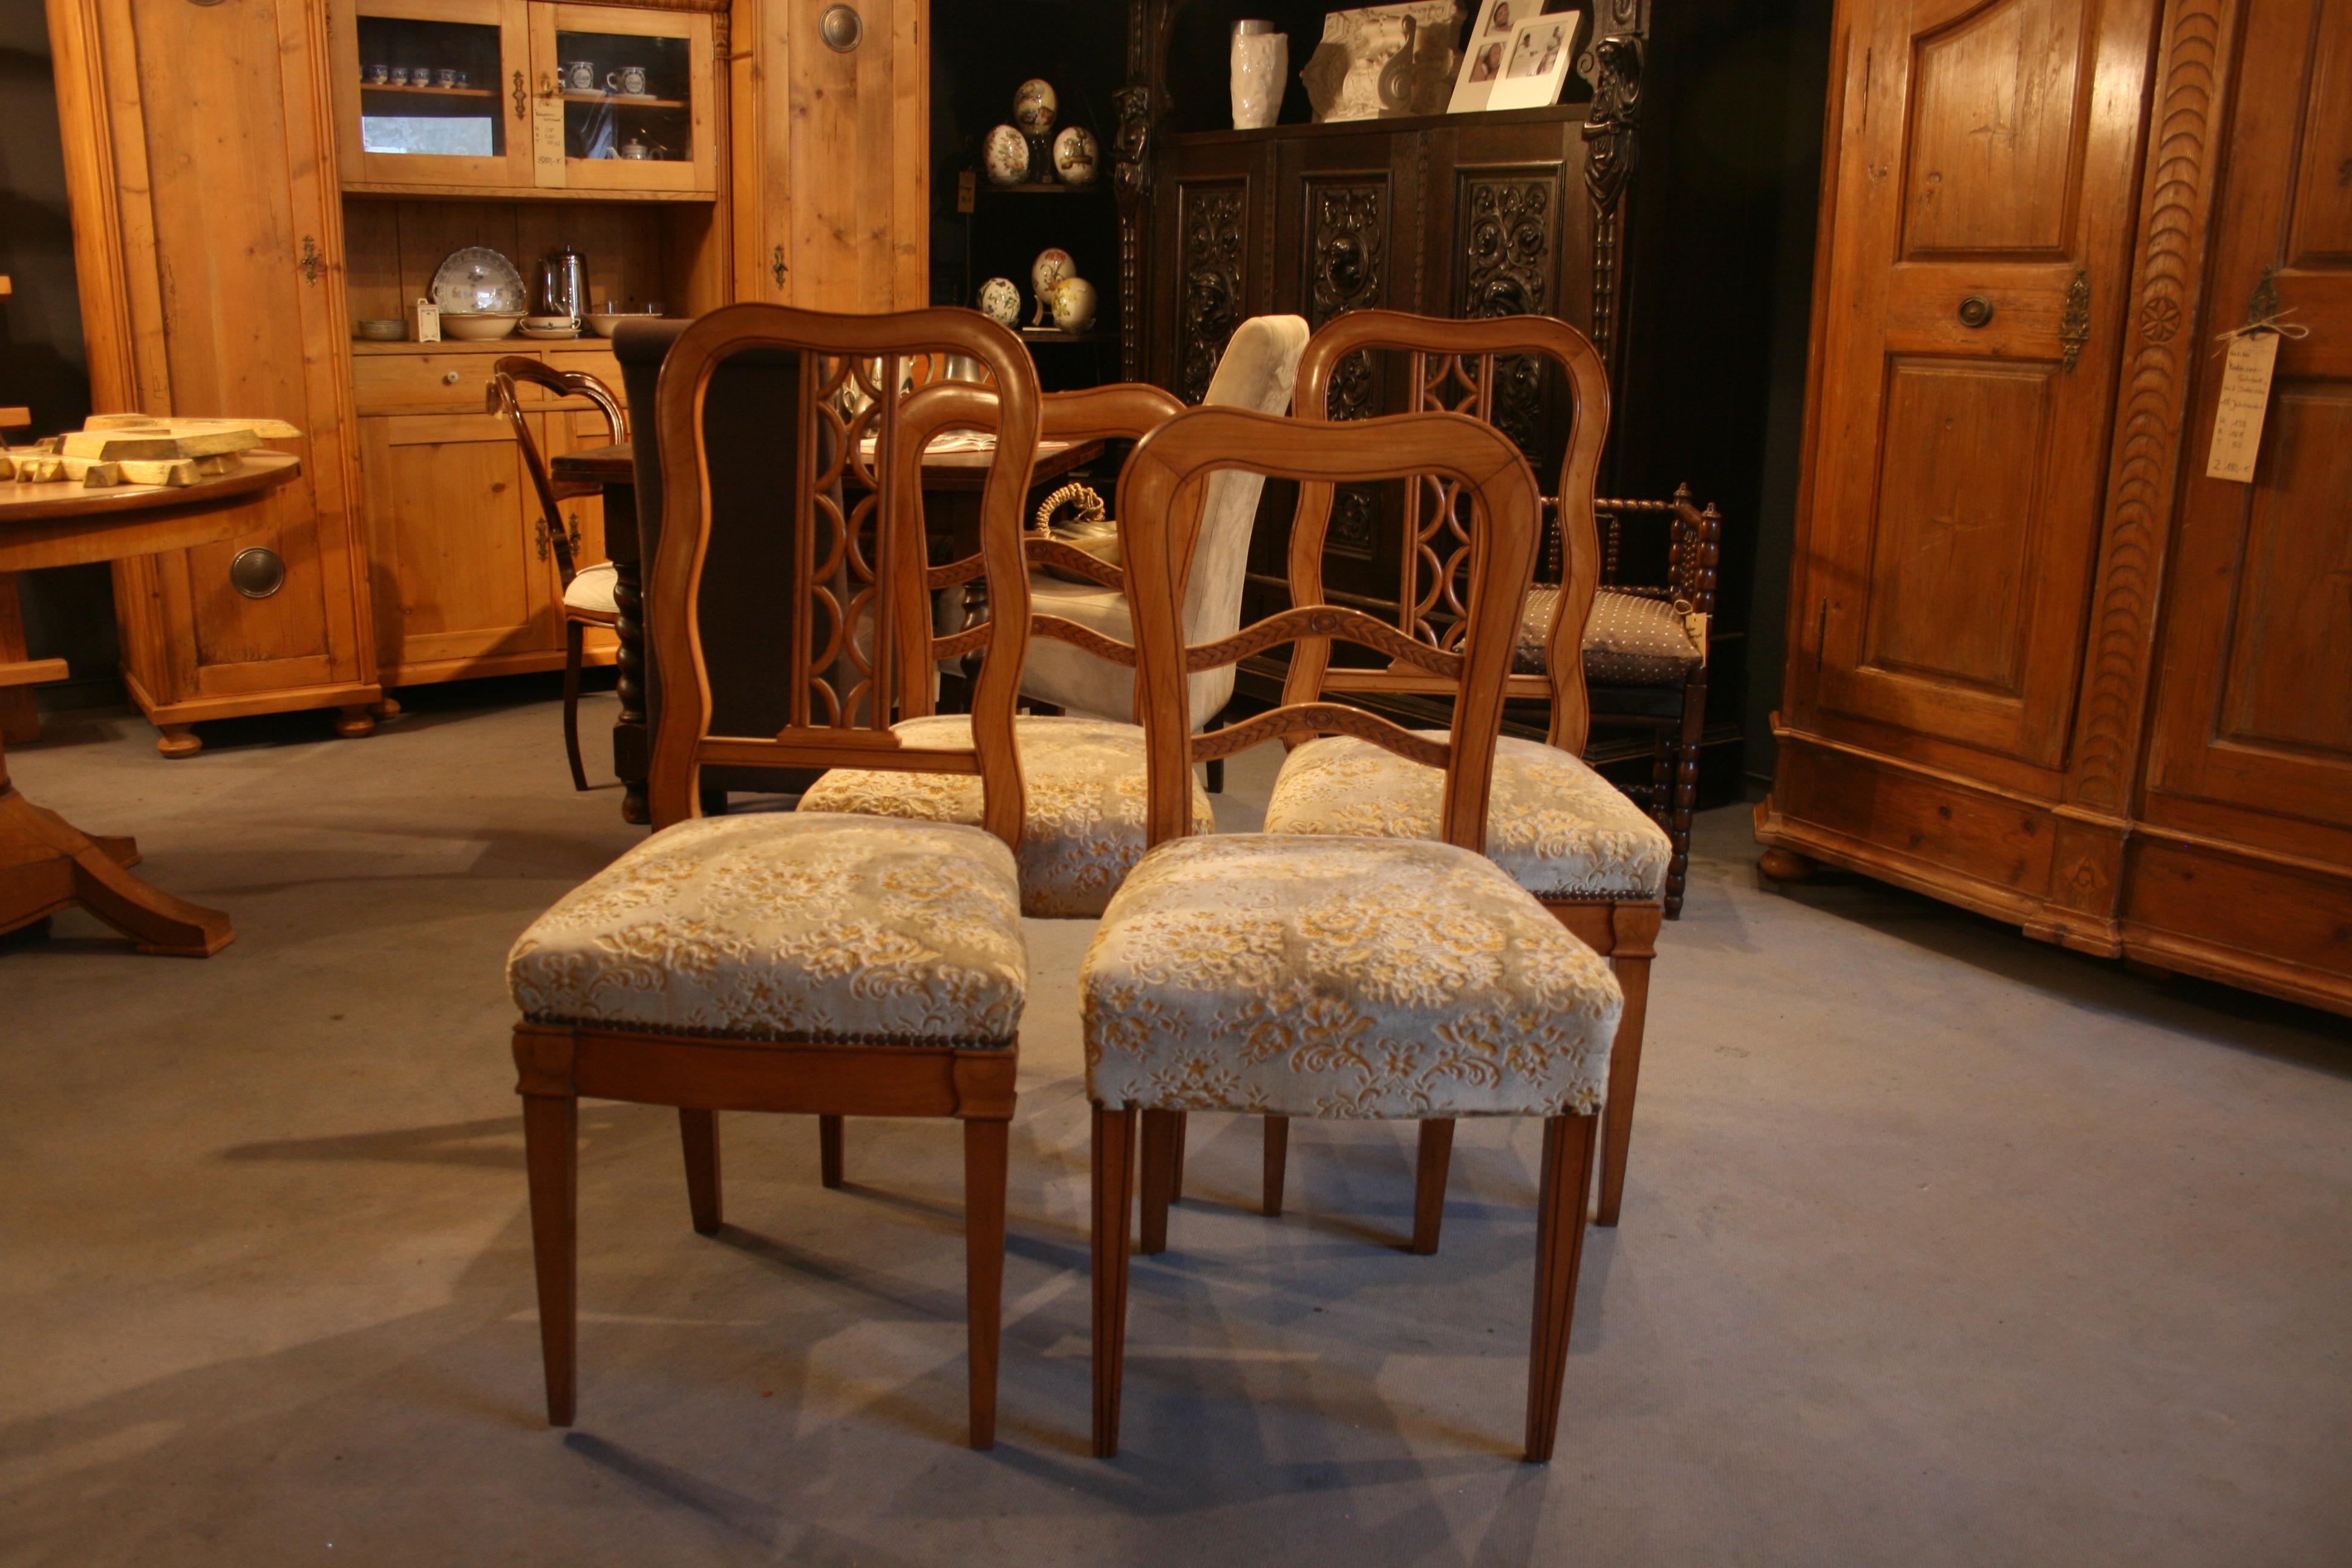 Antique group of 4 German Biedermeier chairs from circa 1840. Each 2 pieces, in different design of fruit wood (cherry wood or pear wood) made.

Dimensions:
1st pair: 95 cm high, 50 cm wide, 50 cm deep; seat height 49 cm
2nd pair: 105 cm high,